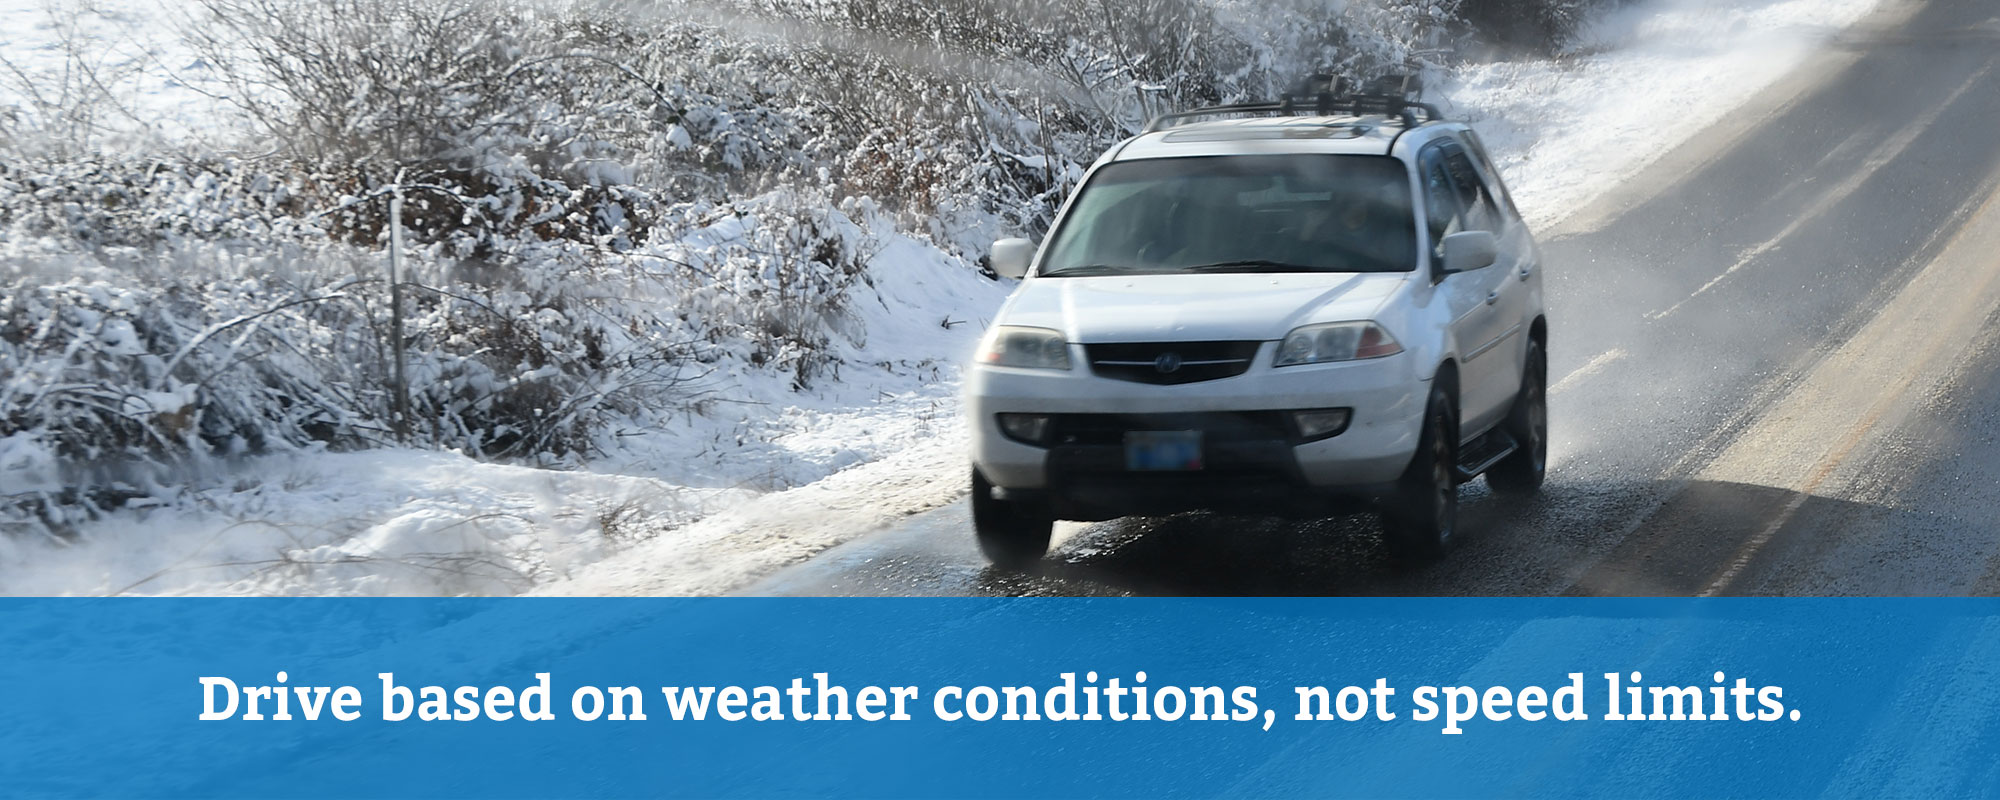 Drive based on weather conditions, not speed limits.